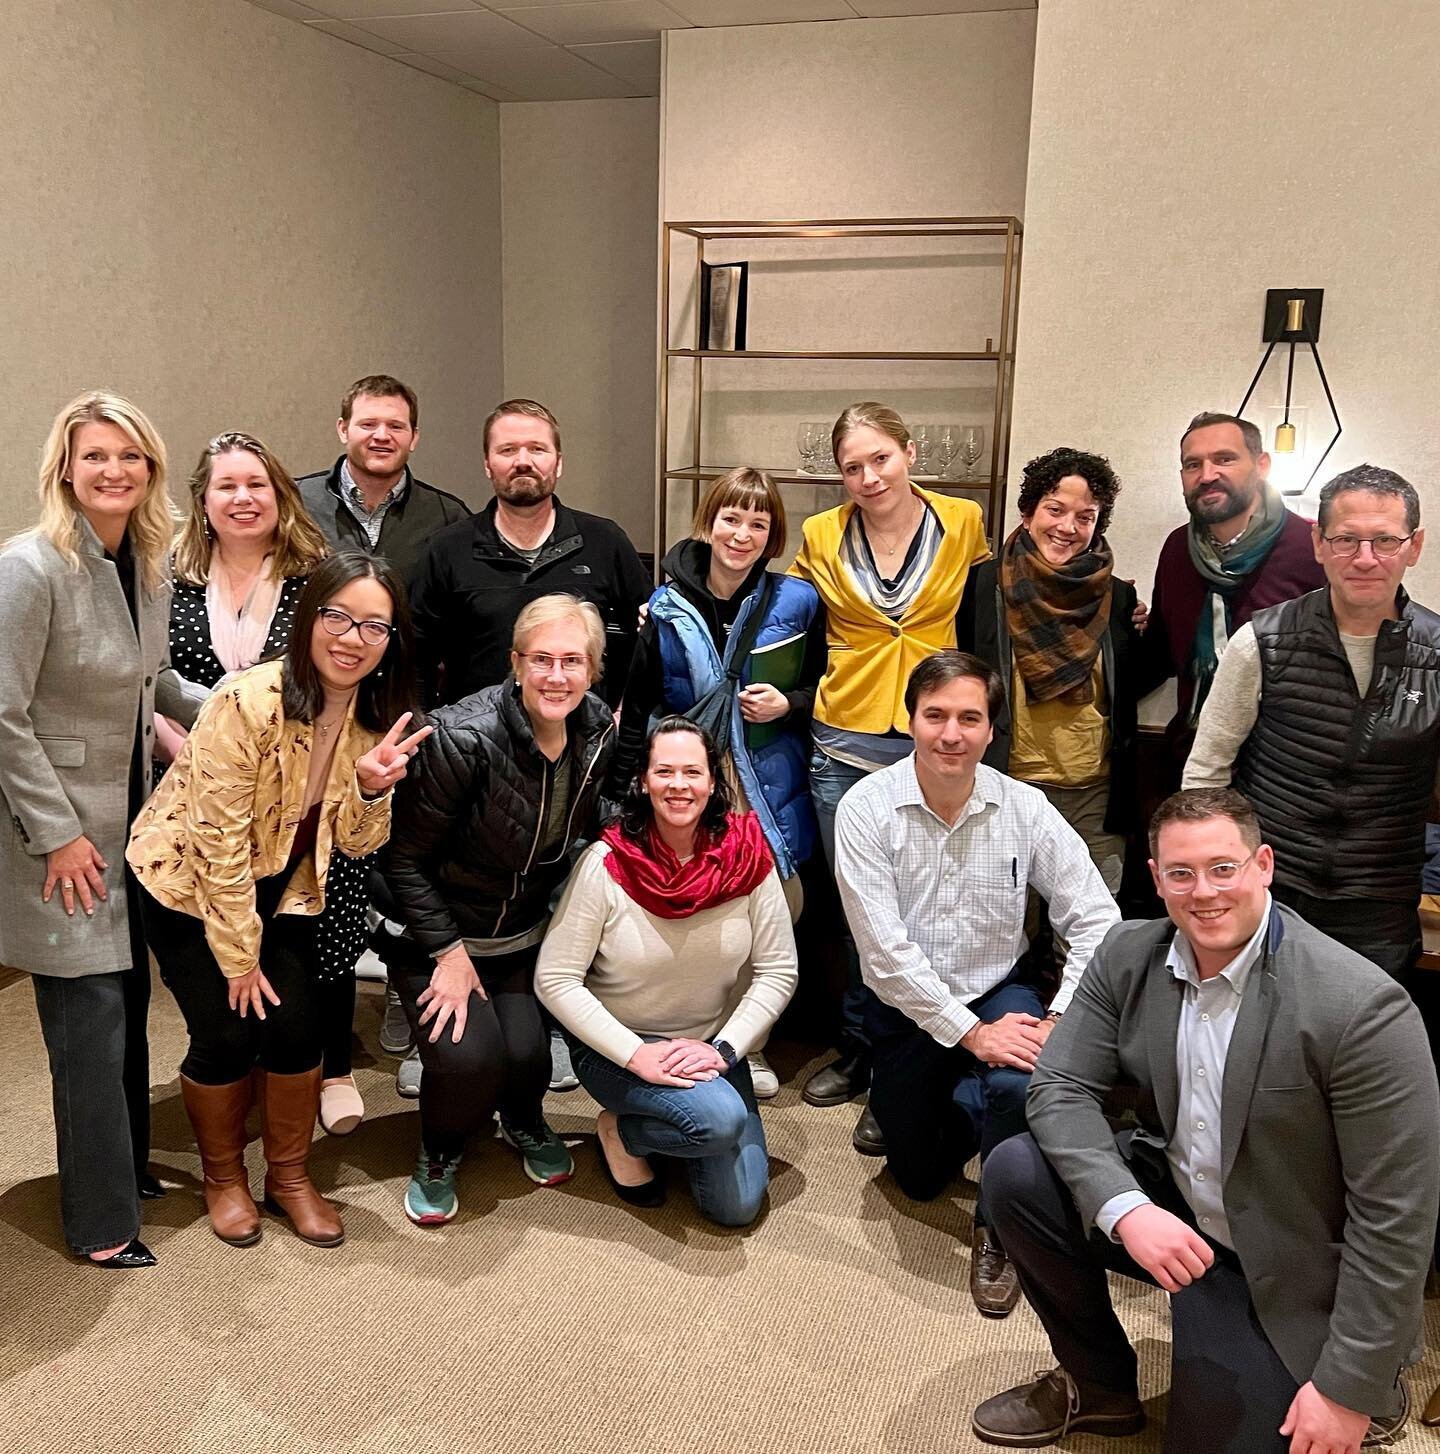 &quot;A rare glimpse into Gallo&hellip;&rdquo;🍷 As part of her Master of Wine training, O&rsquo;Donnell Lane partner @kt_canfield recently took an exclusive trip behind the scenes at E&amp;J Gallo.

Led by @nicholasparismw, director of wine and spir